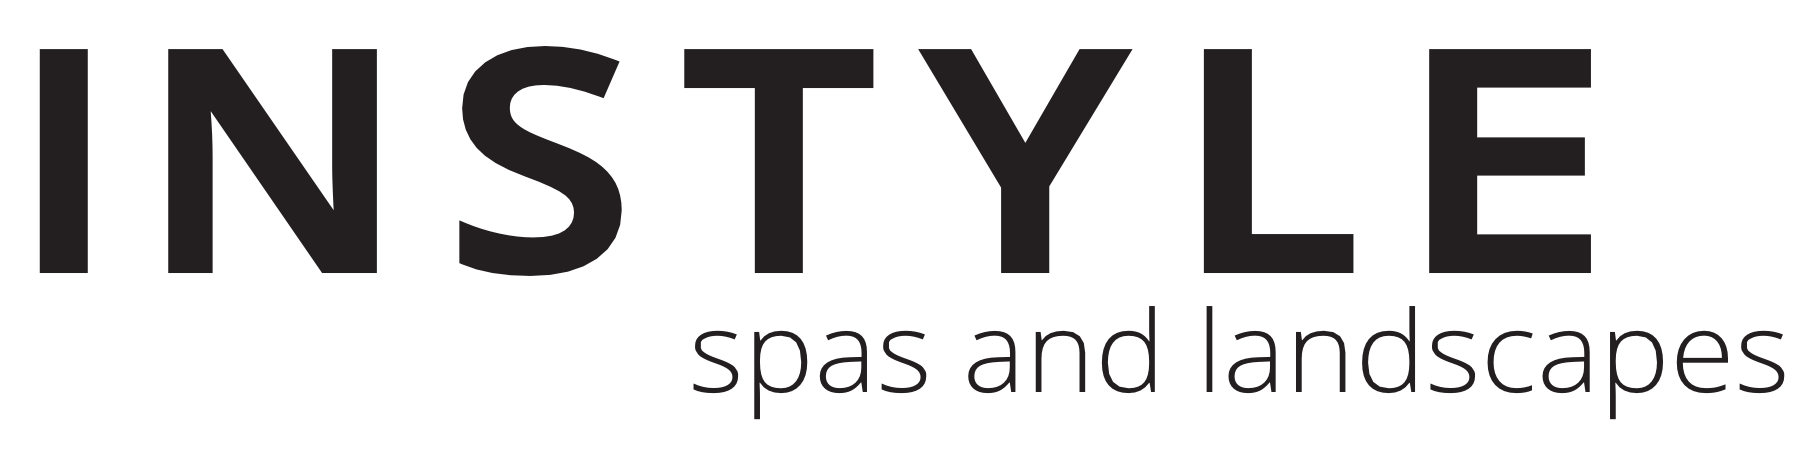 Instyle Spas and Landscapes Pty Ltd